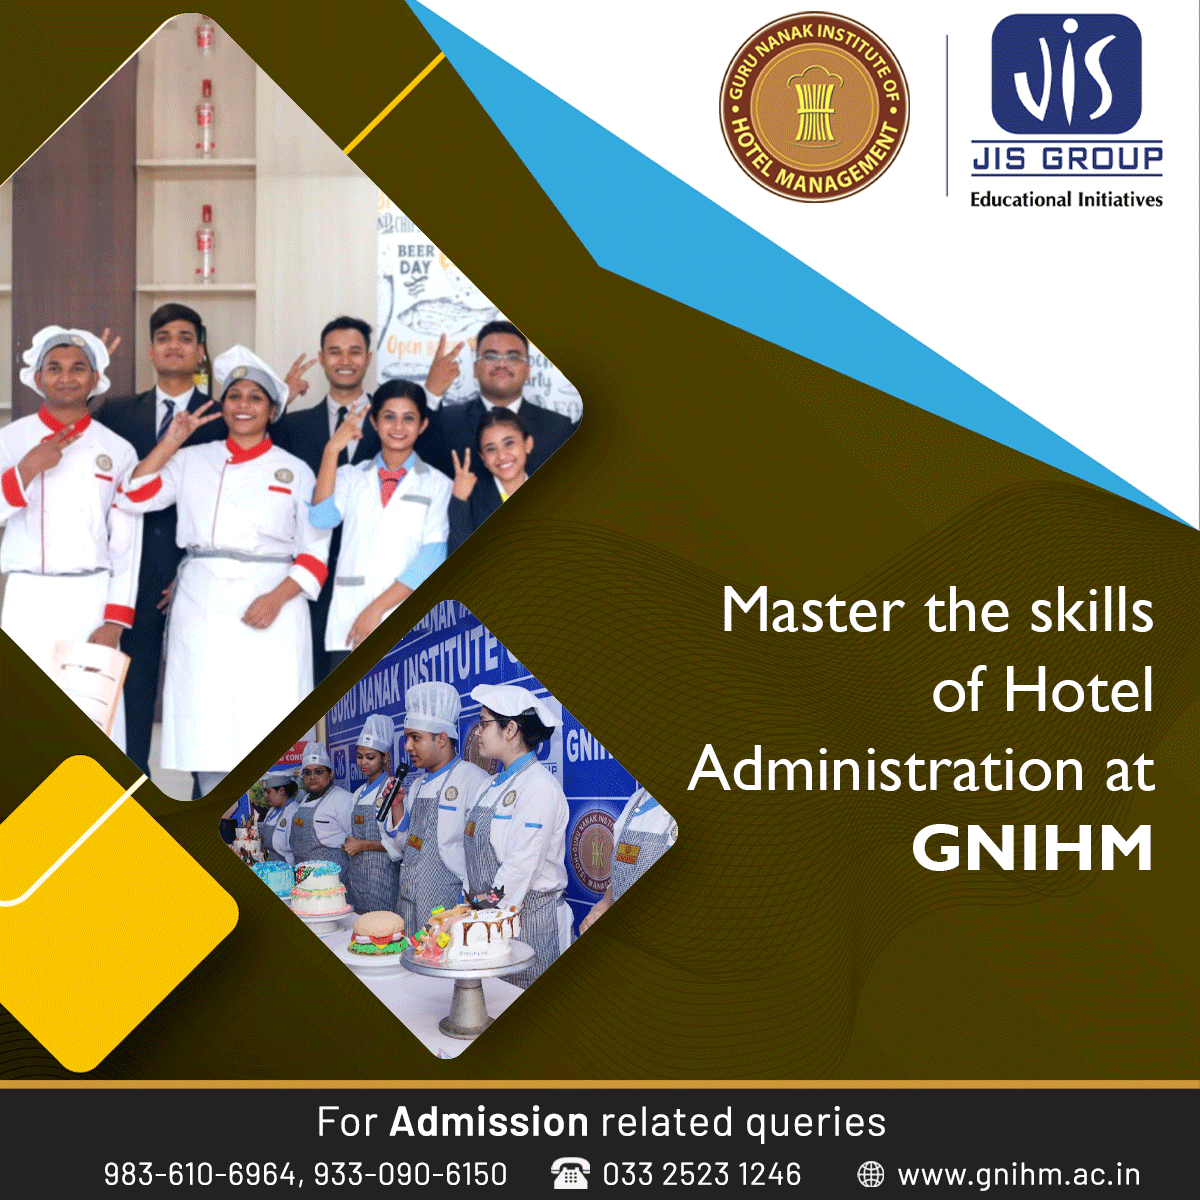 GNIHM offers B. Sc. in Hospitality & Hotel Administration which aims at developing human resources for the Hotel Industry and Hospitality Services. 
#GNIHM #JISGroup #JIS #HospitalityIndustry #HotelAdministration #Kolkata #BestManagementCollege